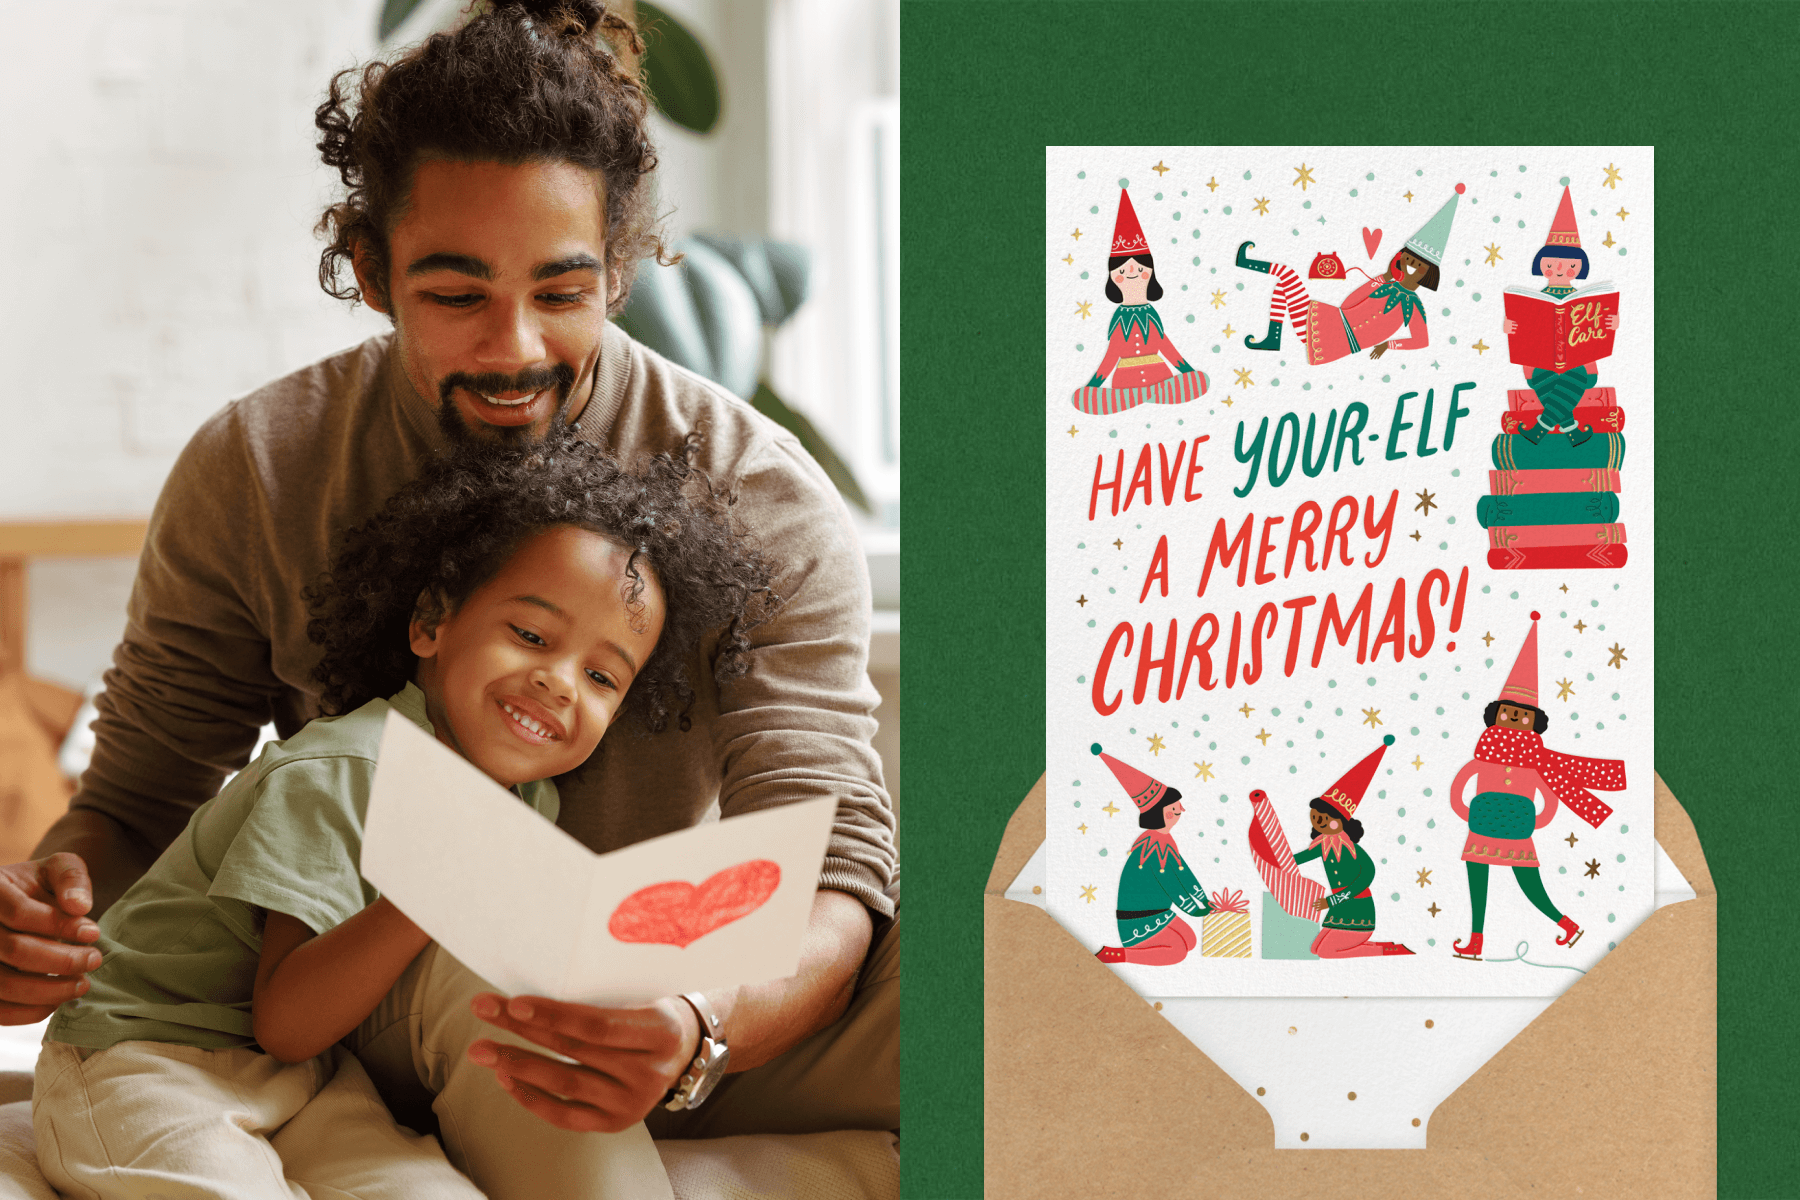 Left: A man and his young son smile as they look at a card with a handdrawn heart on it. Right: A card with illustrations of red and green elves wrapping presents and doing tasks reads “Have your-elf a merry Christmas.”